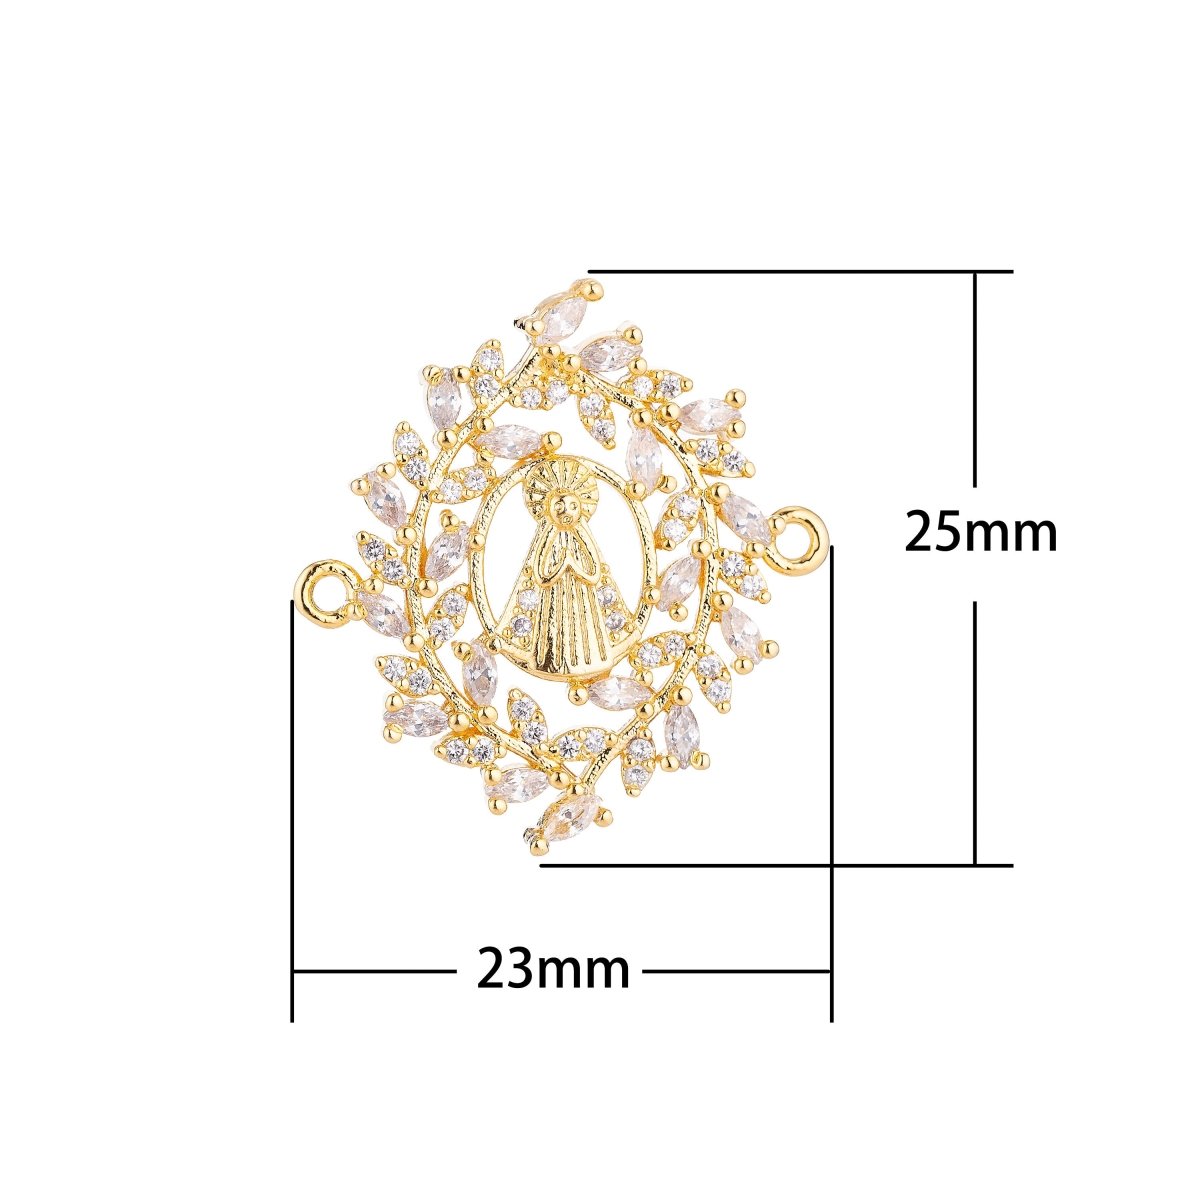 CLEARANCE | White, Rose Gold, 18K Gold Filled, Gun Metal Plated Spiritual Religious Mother Mary Praying in Wreath, Cubic Zirconia Bracelet Charm Bead Finding Connector For Jewelry Making | F-022 - DLUXCA